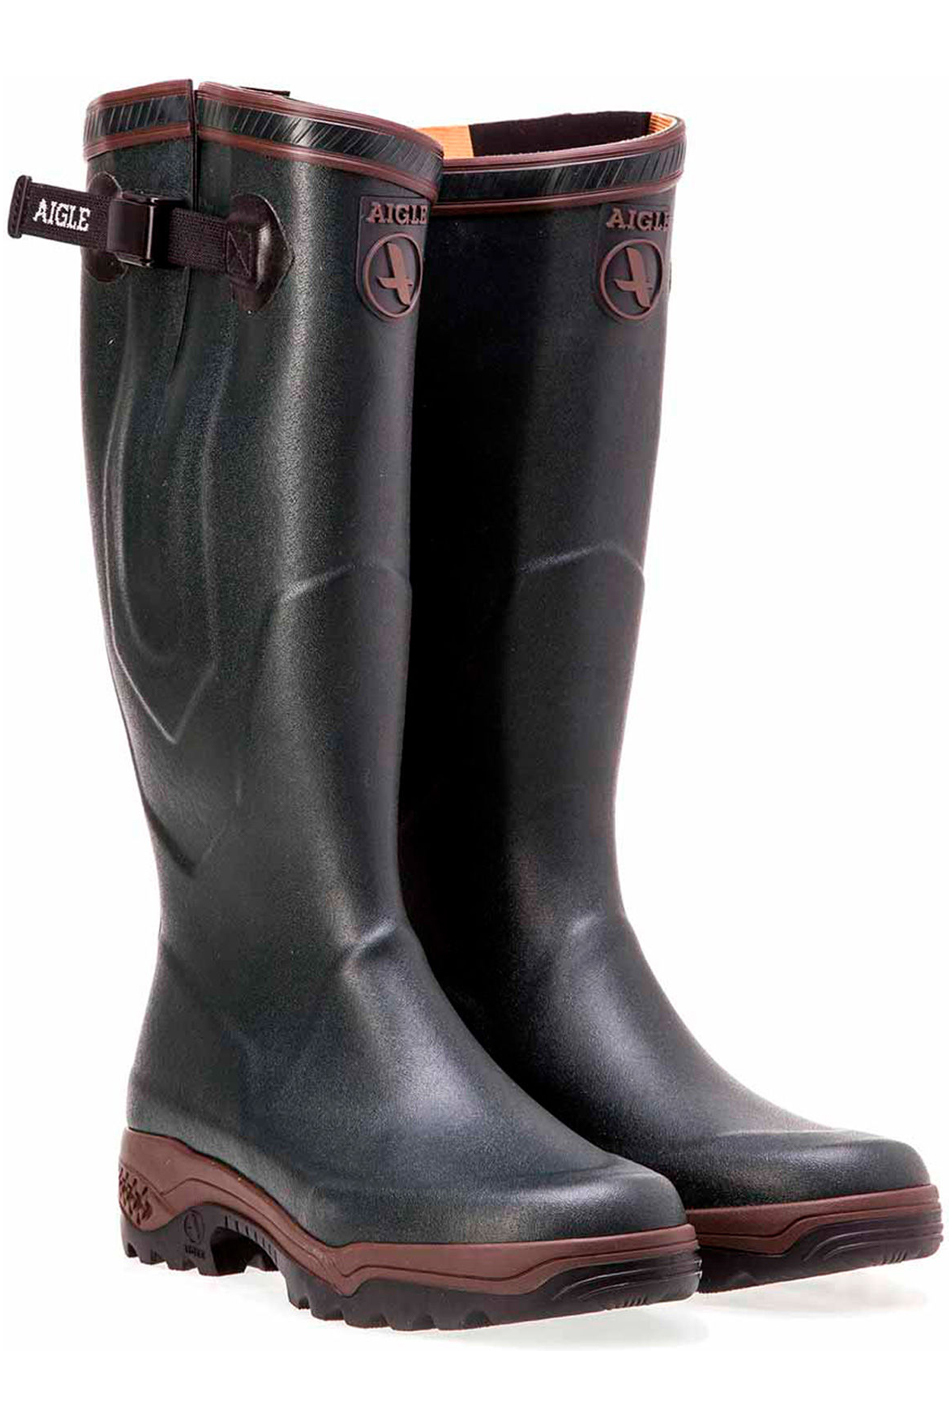 dette stribe Vælge Aigle Mens Boots Parcours 2 ISO Vario Anti-Fatigue Hunting Bronze |  Equestrian | Boots | The Drillshed